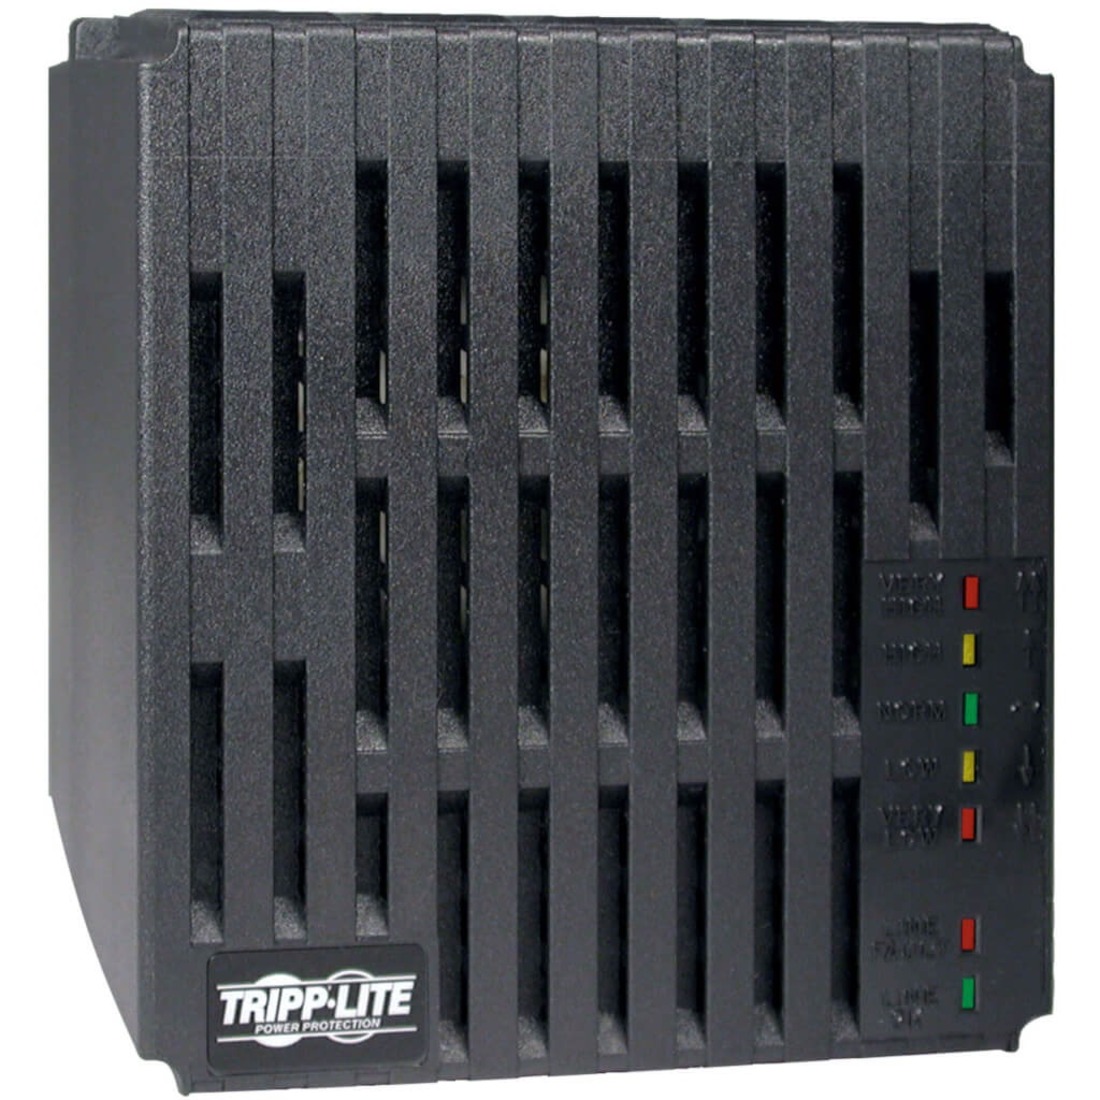 Tripp Lite 1800W Line Conditioner w/ AVR / Surge Protection 120V 15A 60Hz 6 Outlet 6ft Cord Power Conditioner